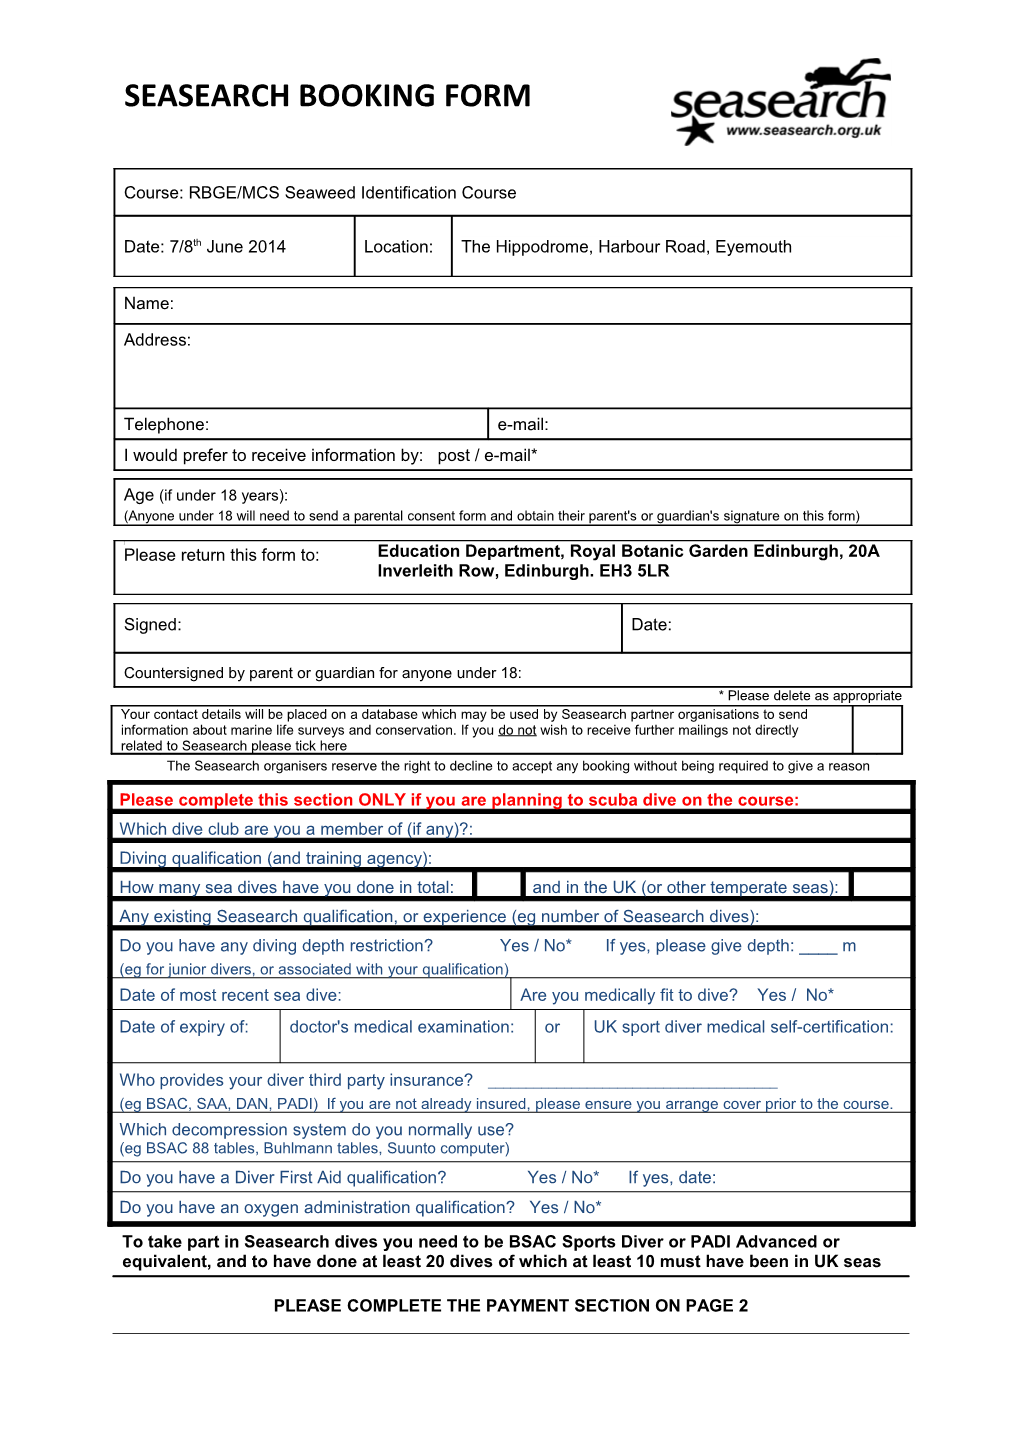 Seasearch Booking Form